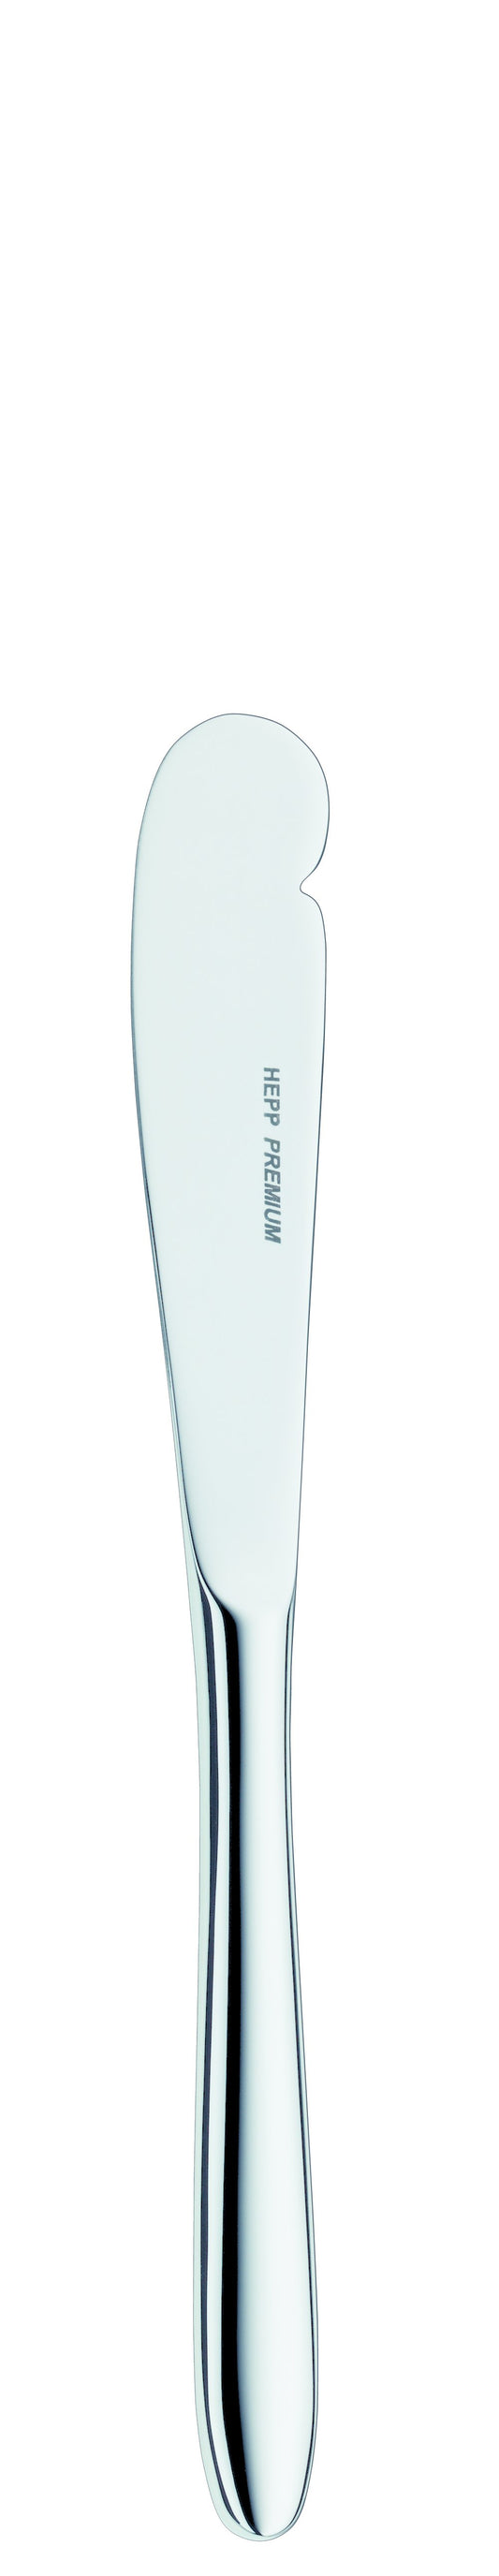 Butter knife MB ECCO 170mm